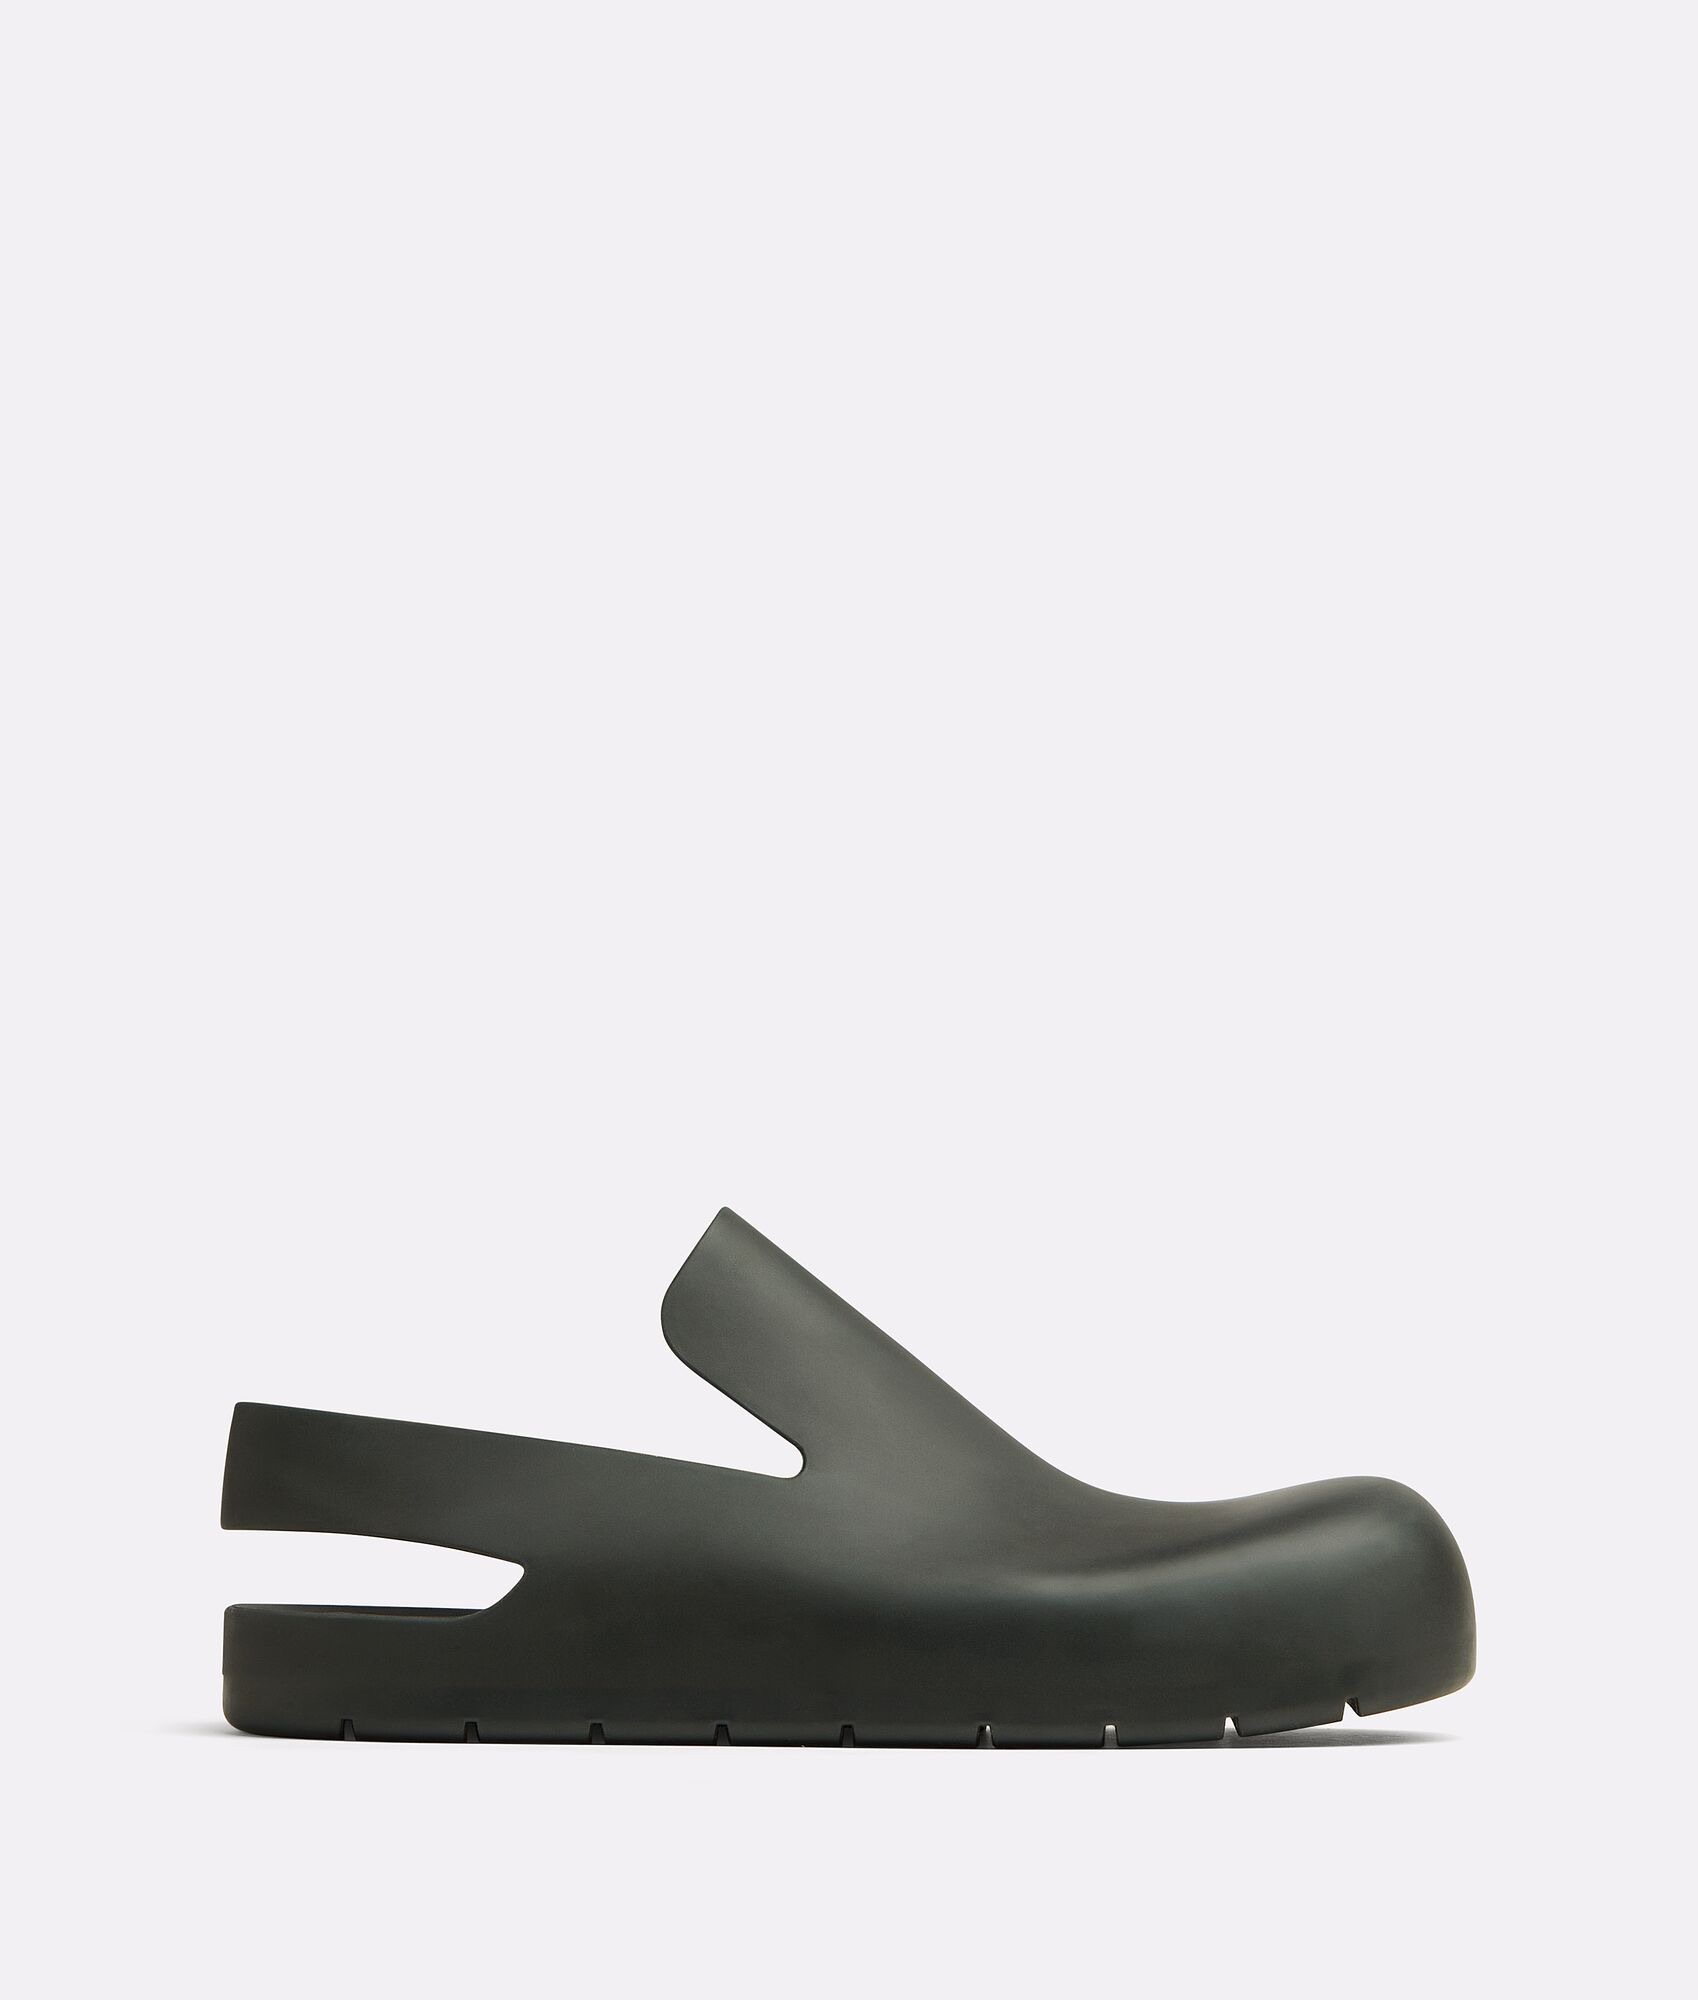 Trending Rubber Shoes Are Changing the Game Of Comfort Footwear - V ...